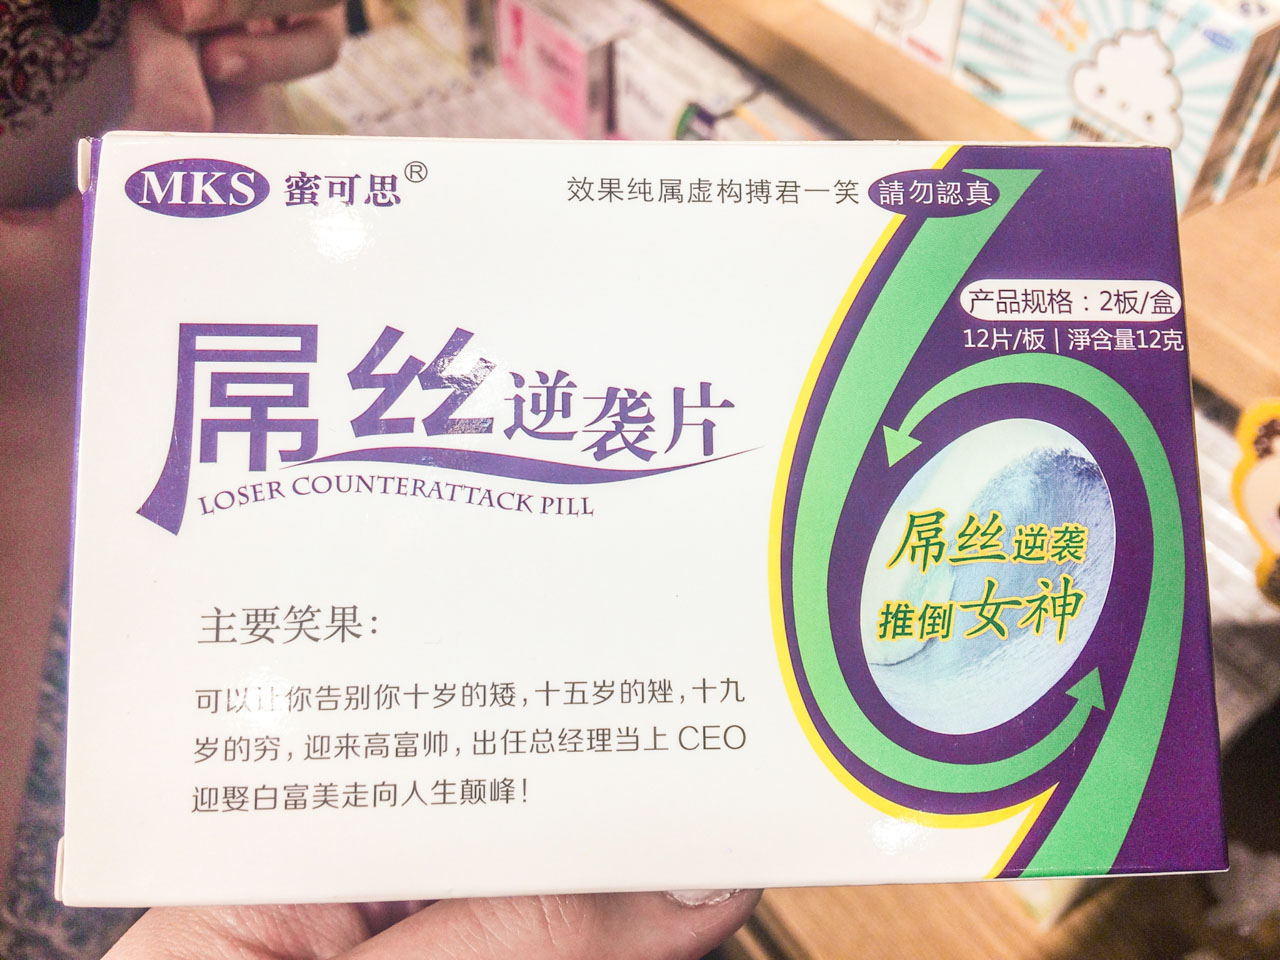 A pack of "loser counterattack pill" at a souvenir shop in Beijing, China